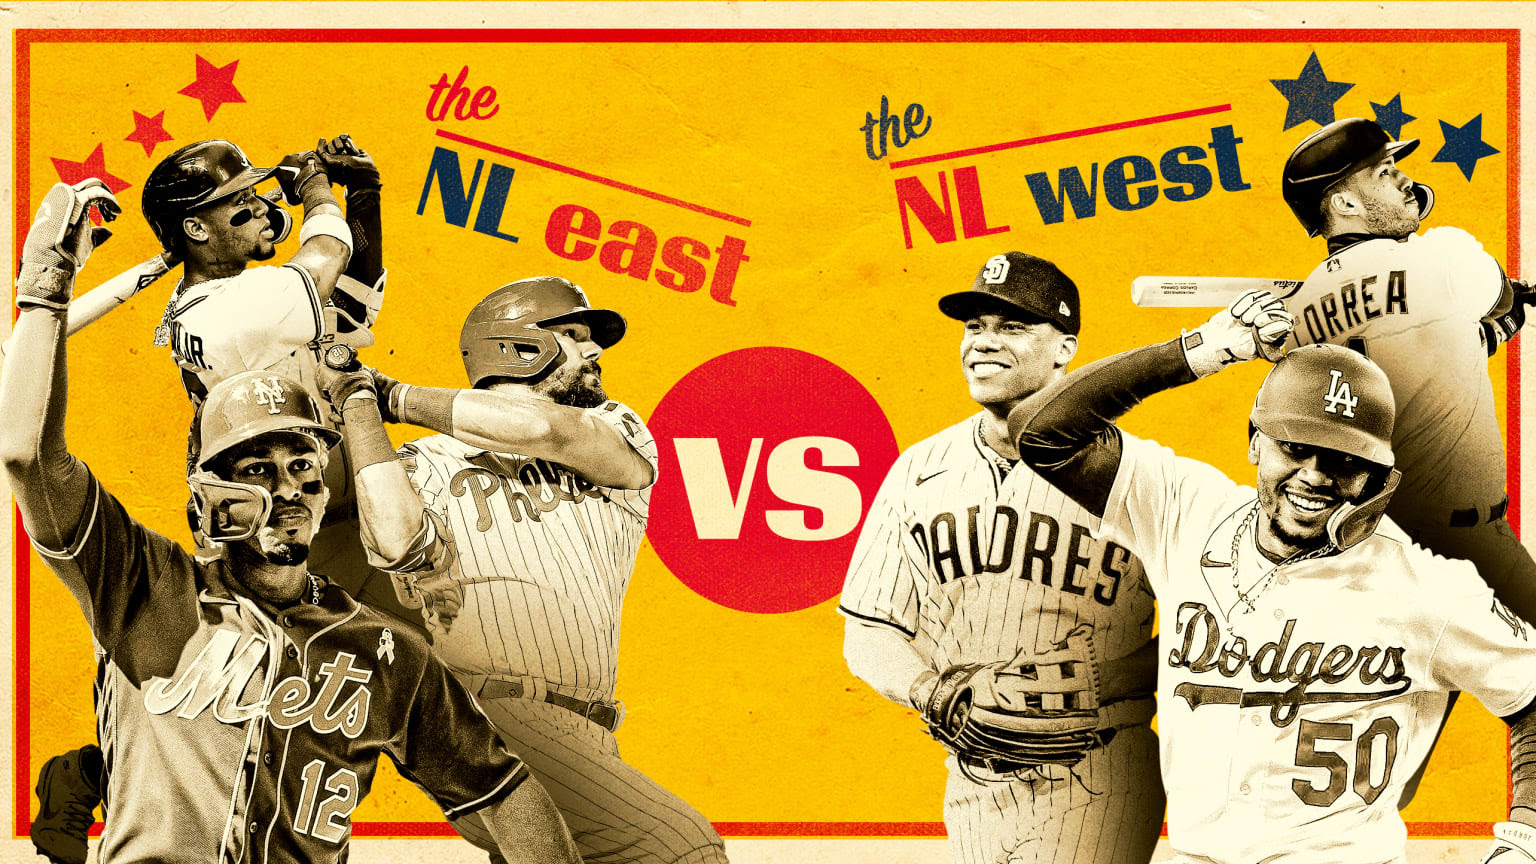 A photo illustration showing three players from the NL East and three from the NL West